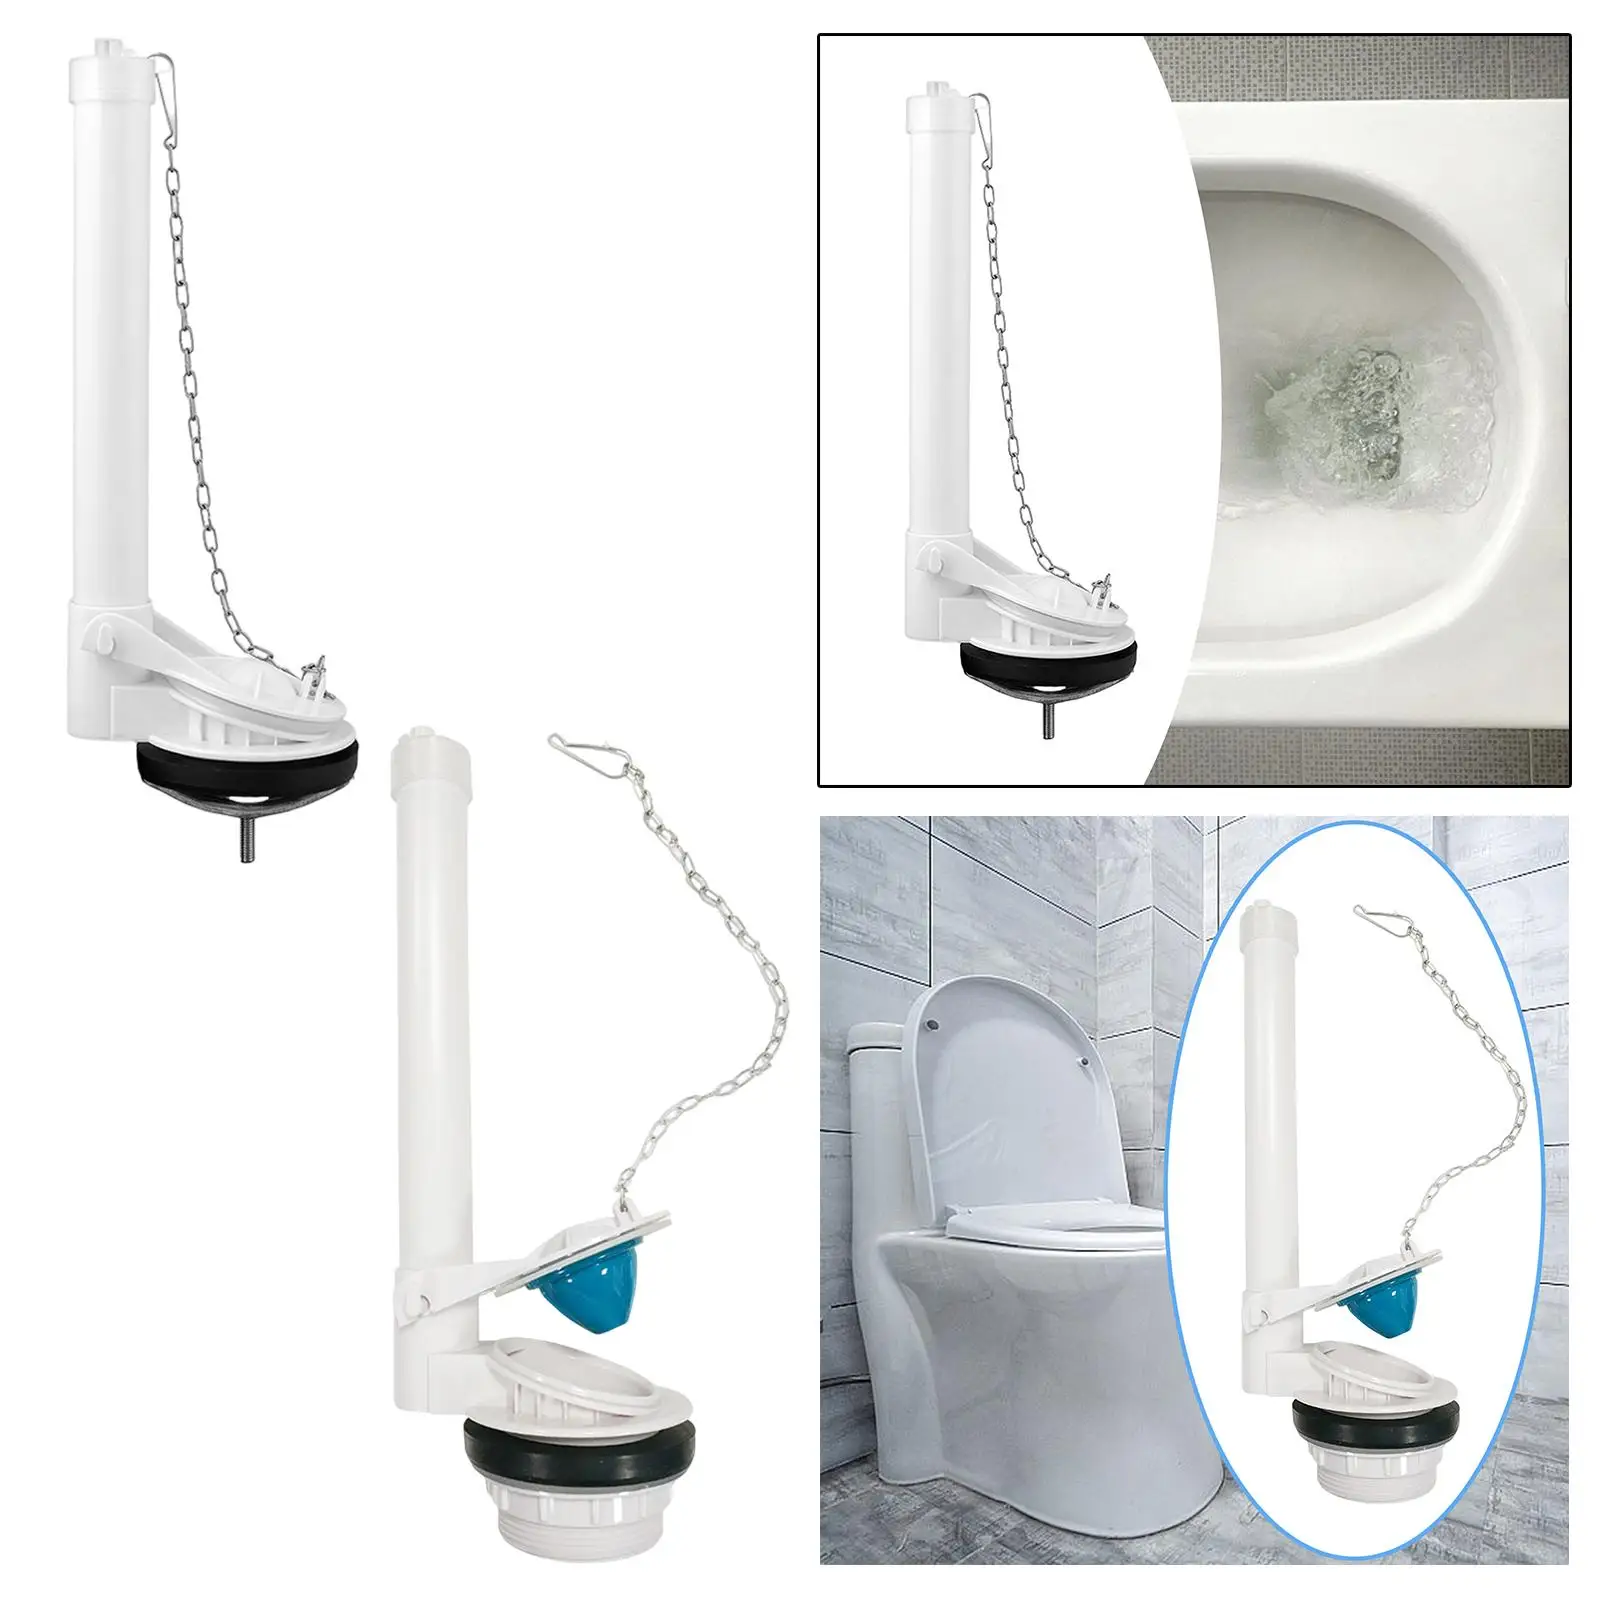 Flushing Valve Water Saving Replacement with Flapper, Chain Universal Toilet Tank Parts Easy Install Toilet Drain Valve